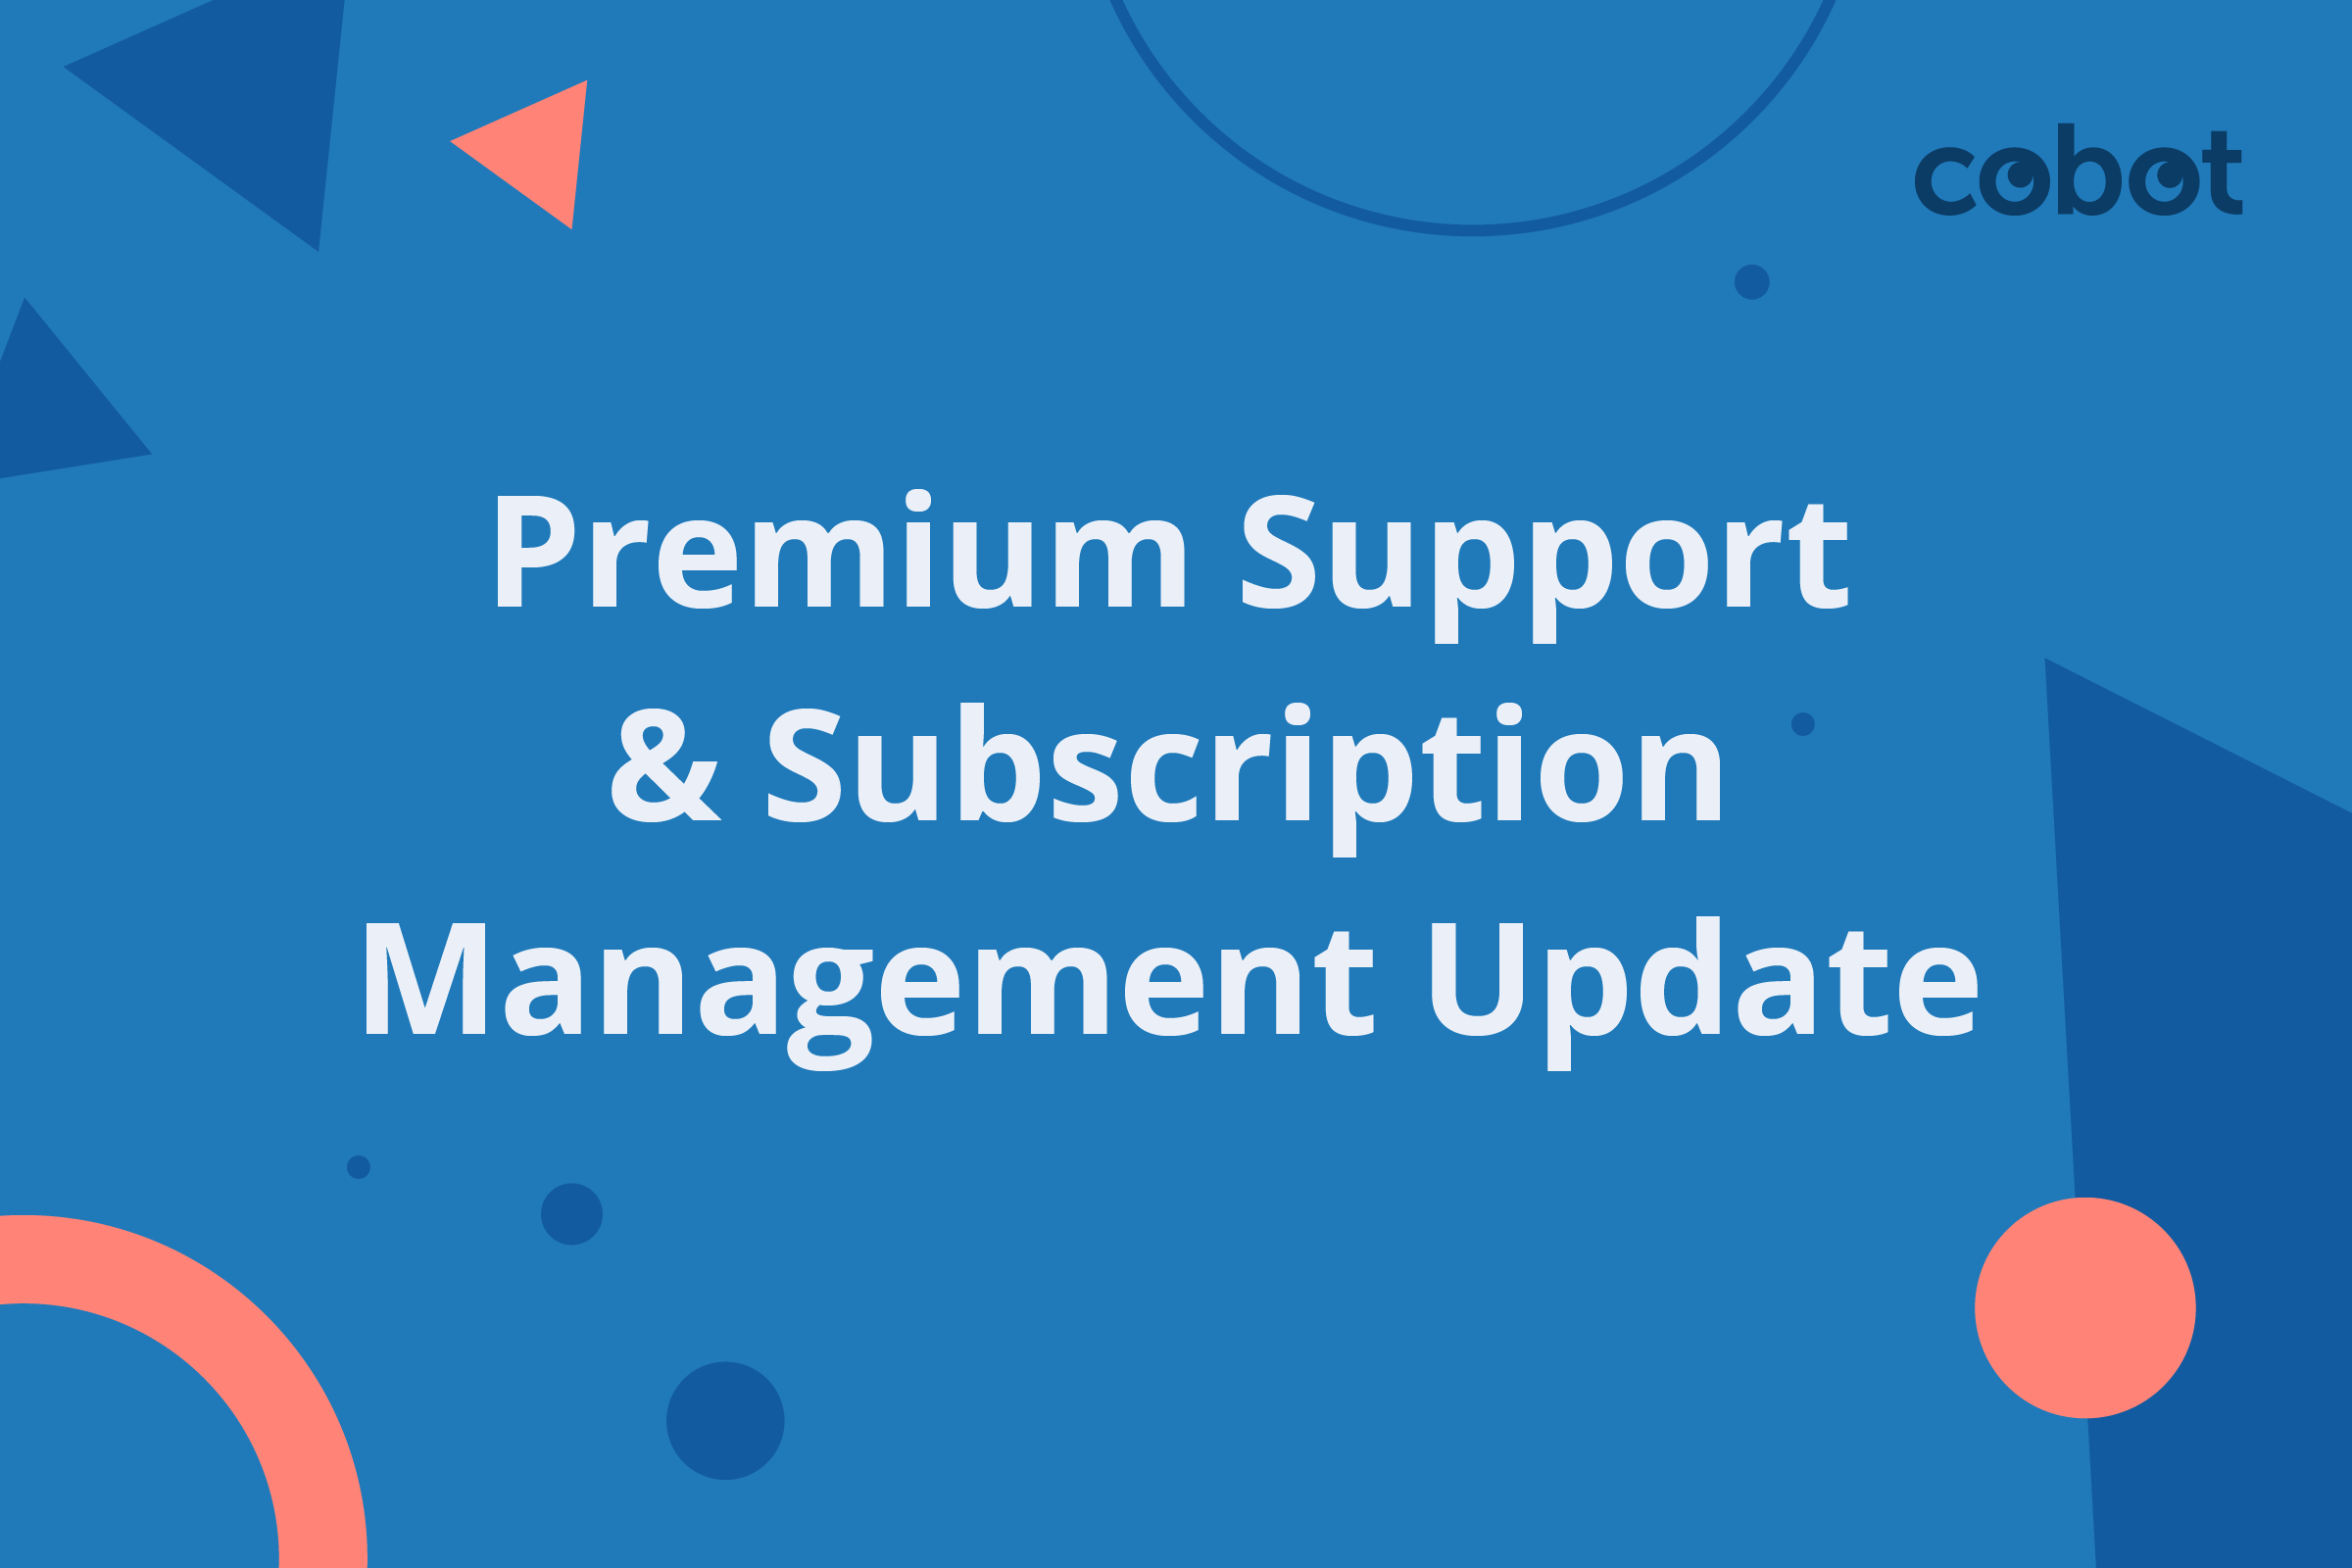 Introducing Cobot’s Premium Support and a renewed way to manage your Subscription